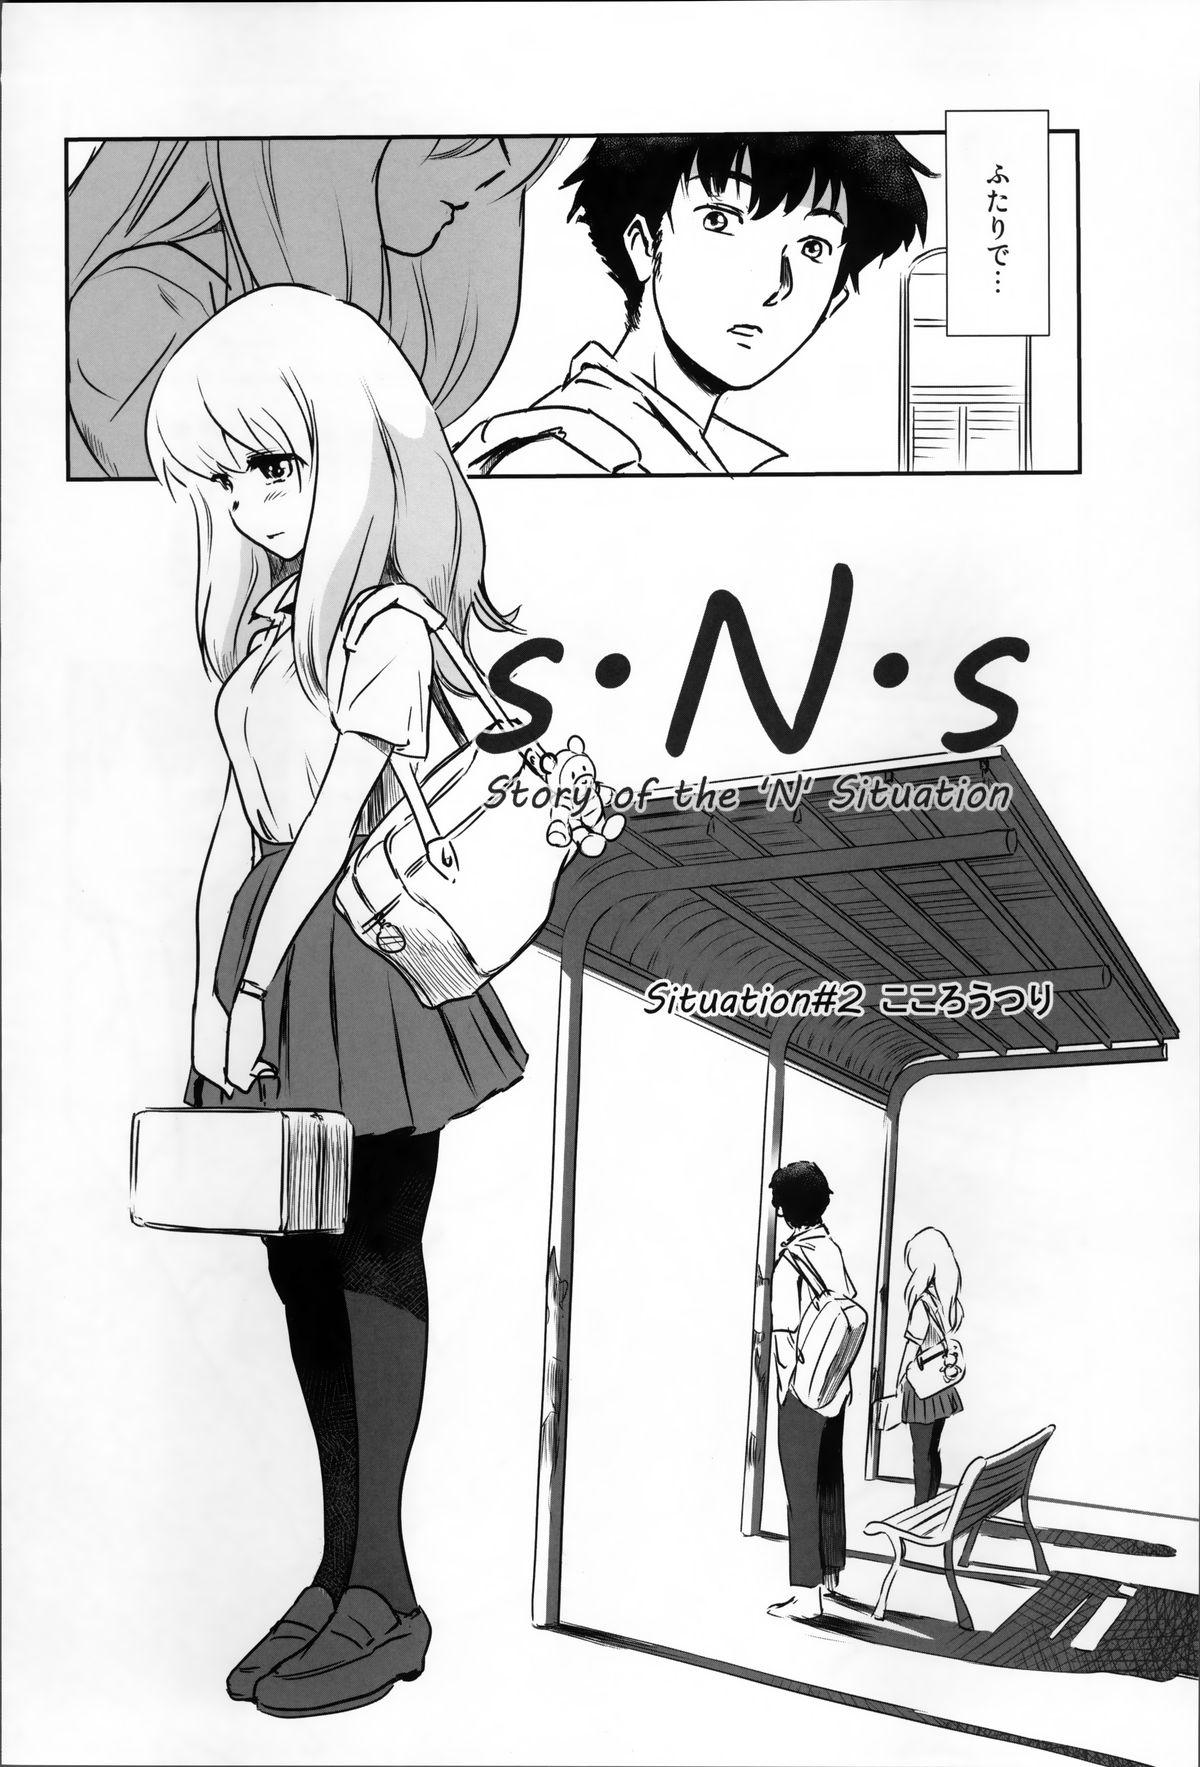 Tanned Story of the 'N' Situation - Situation#2 Kokoro Utsuri Mouth - Page 4